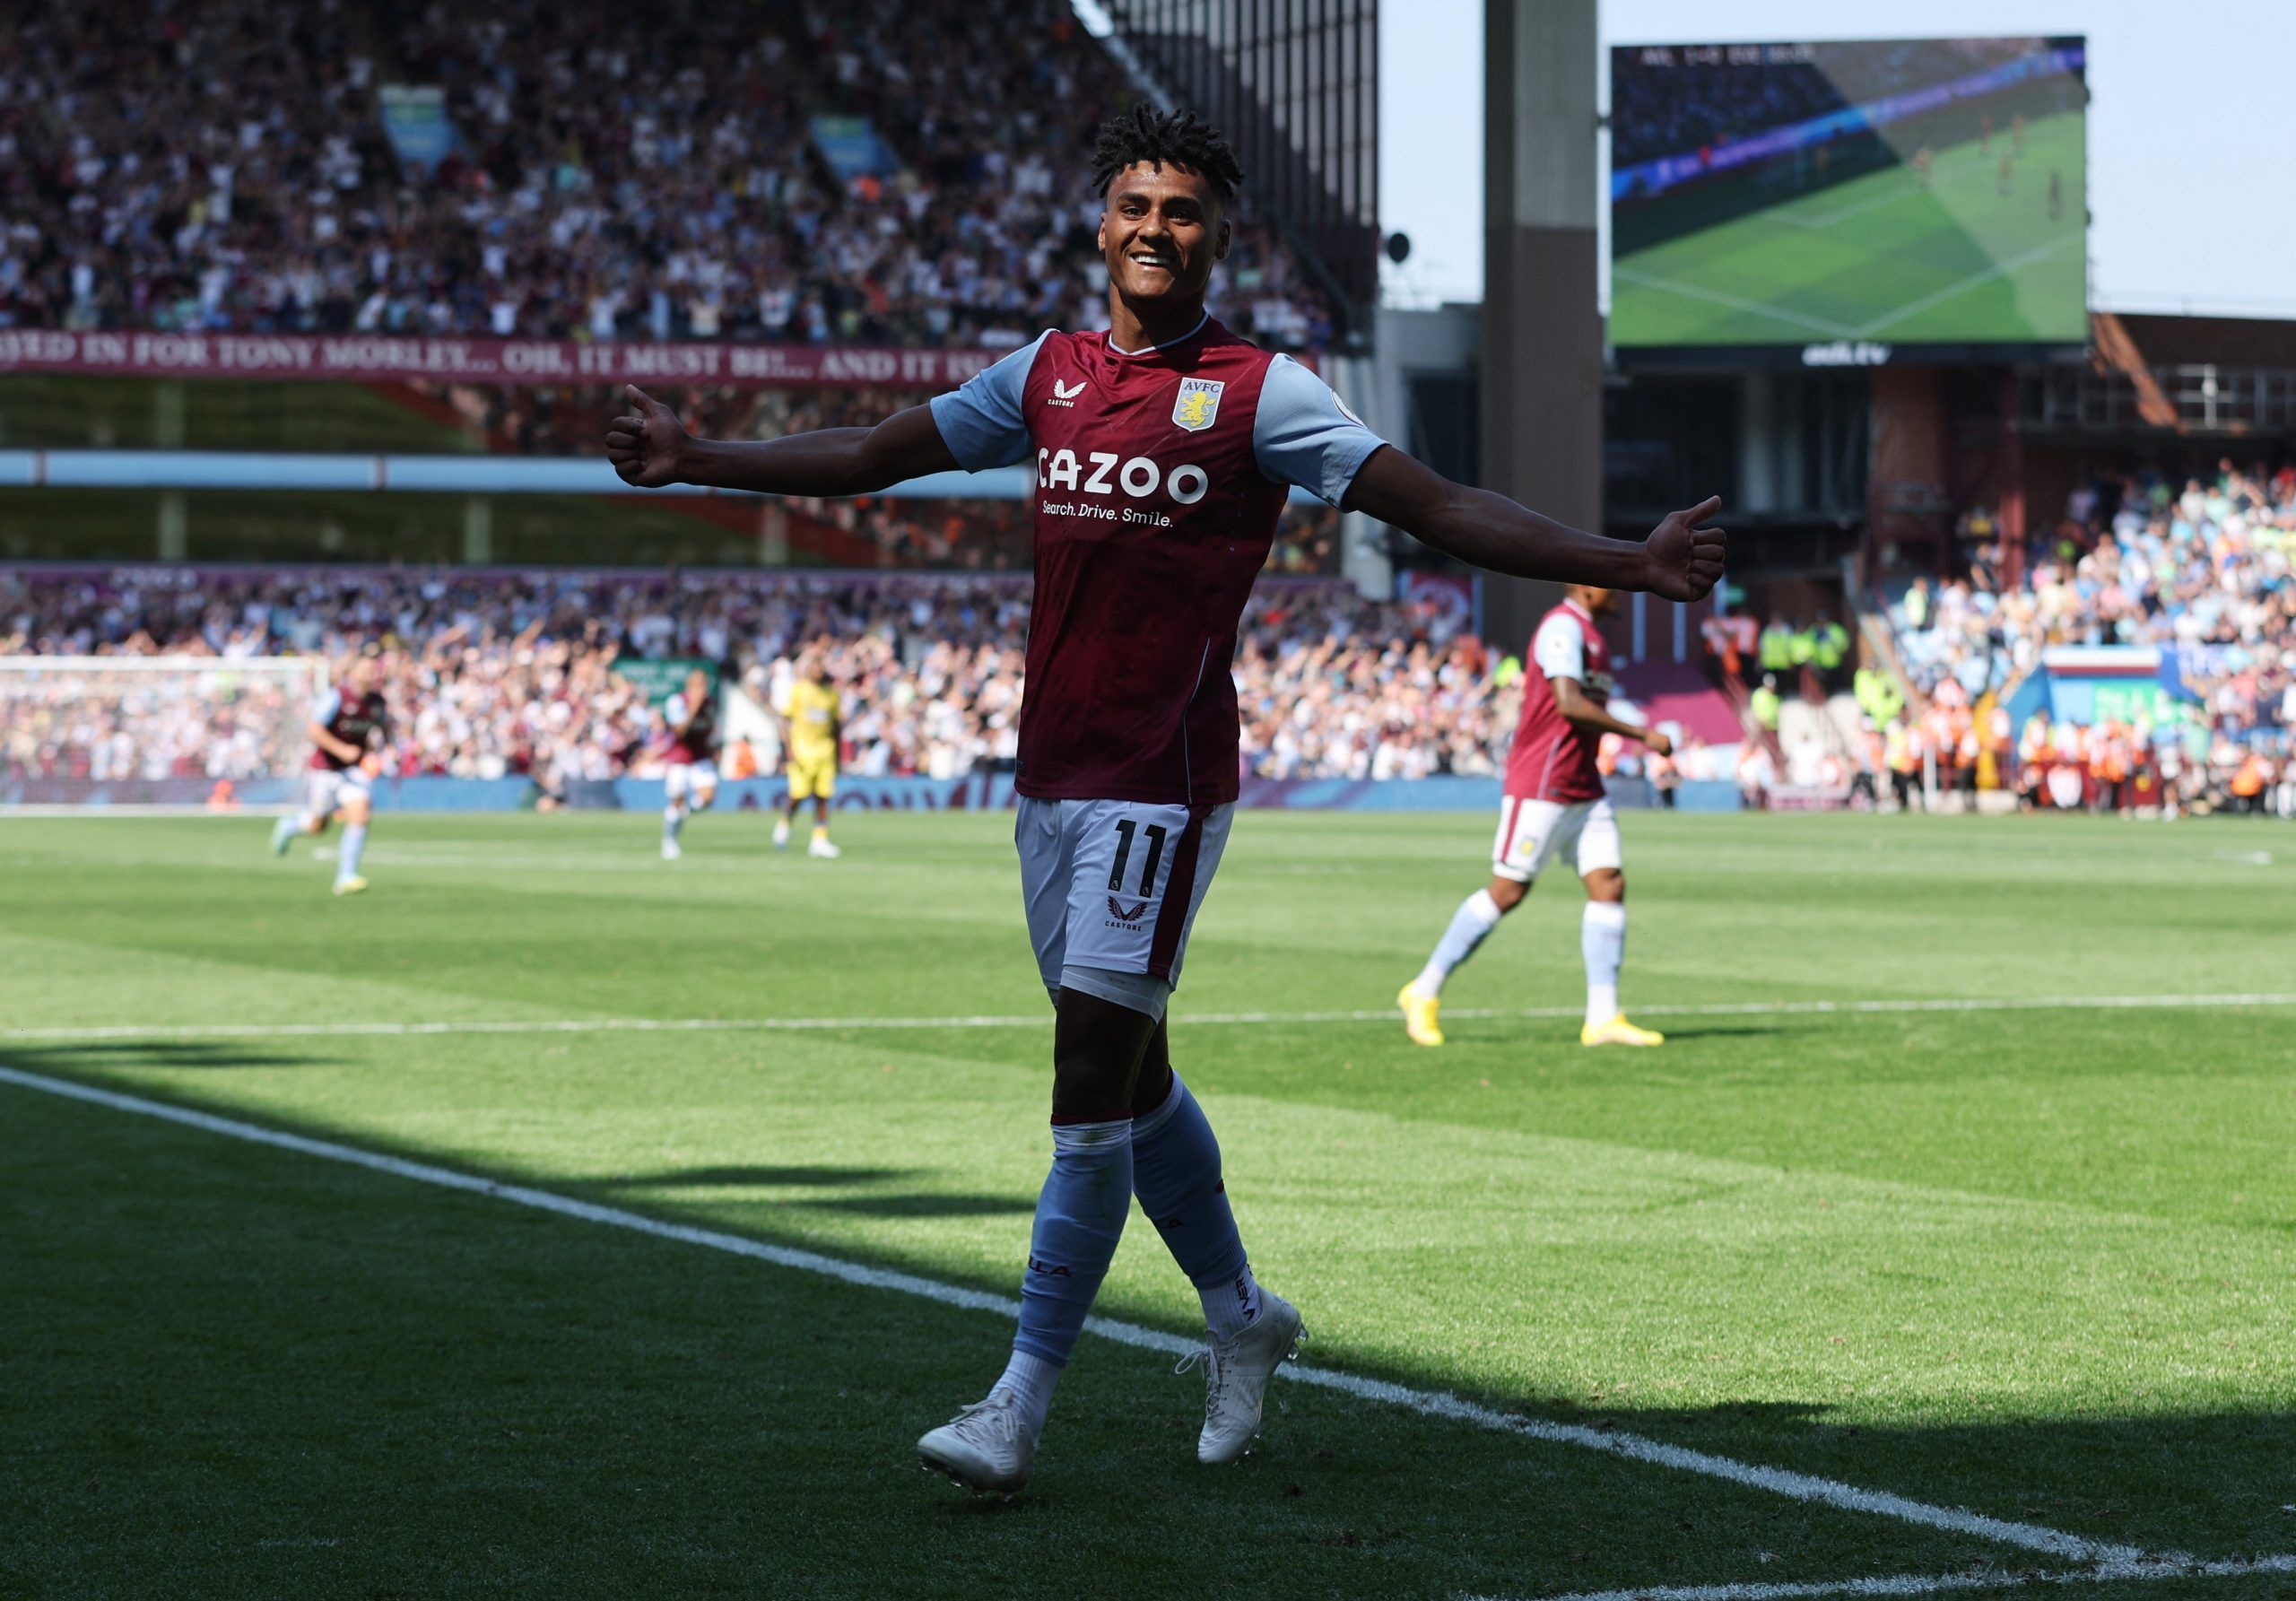 Soccer Football - Premier League - Aston Villa v Everton - Villa Park, Birmingham, Britain - August 13, 2022 Aston Villa's Ollie Watkins celebrates their second goal, scored by Emiliano Buendia Action Images via Reuters/Carl Recine EDITORIAL USE ONLY. No use with unauthorized audio, video, data, fixture lists, club/league logos or 'live' services. Online in-match use limited to 75 images, no video emulation. No use in betting, games or single club /league/player publications.  Please contact you